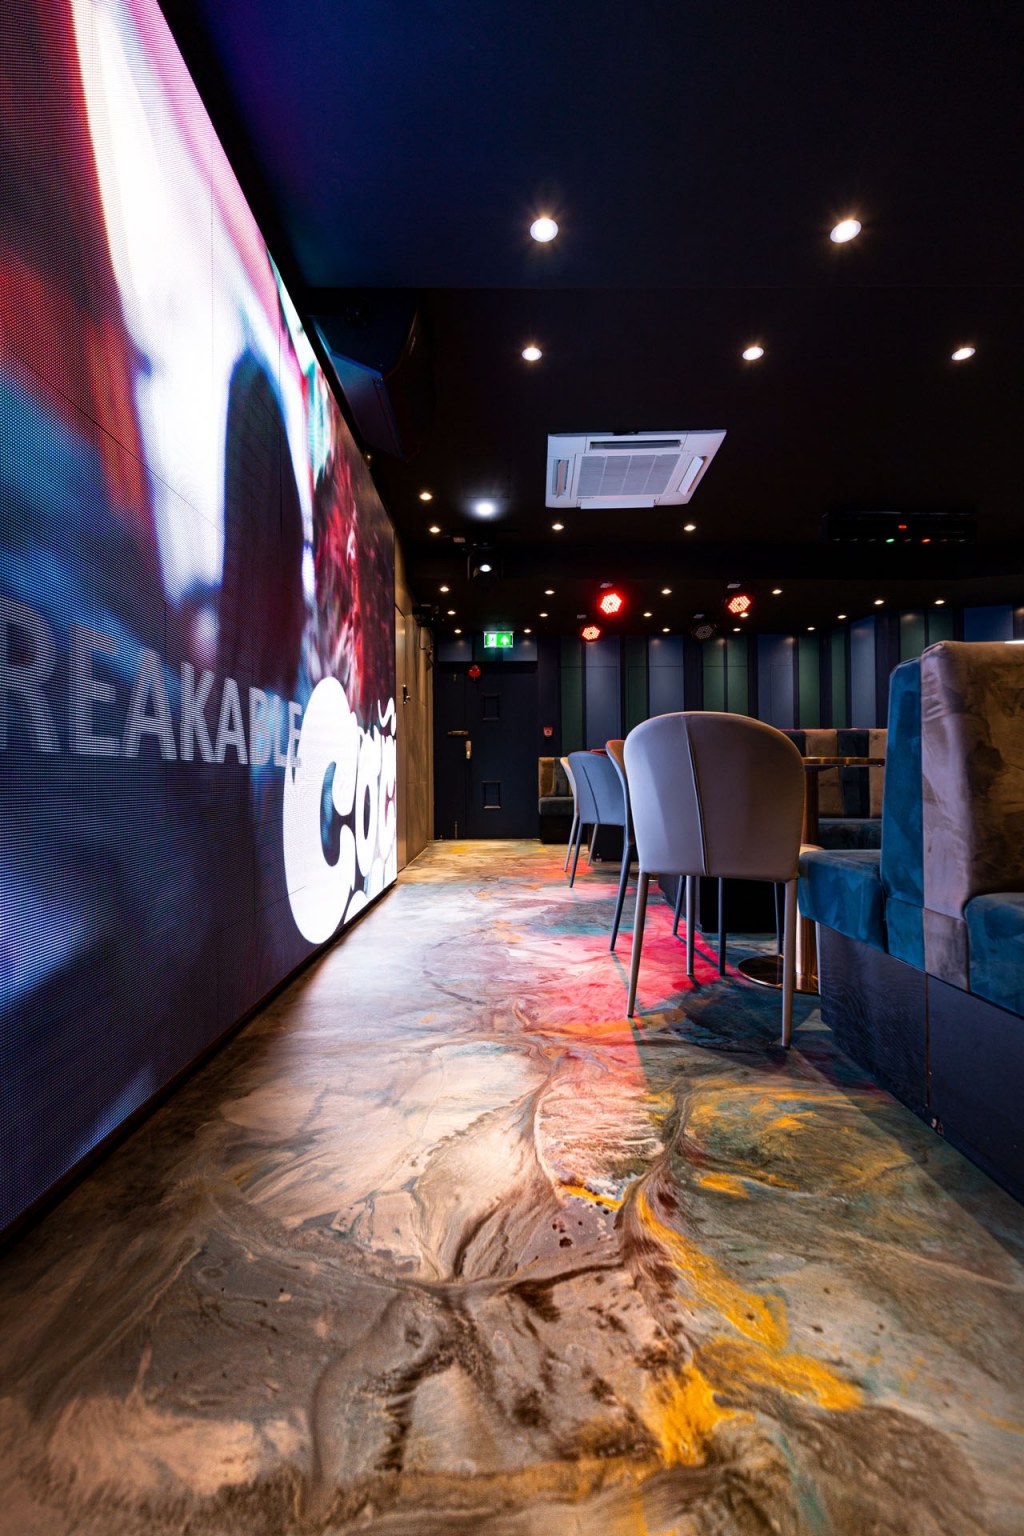 Cococure Cocktail Bar and Nightclub - Aldgate, London. / Video Wall and Graphics floor